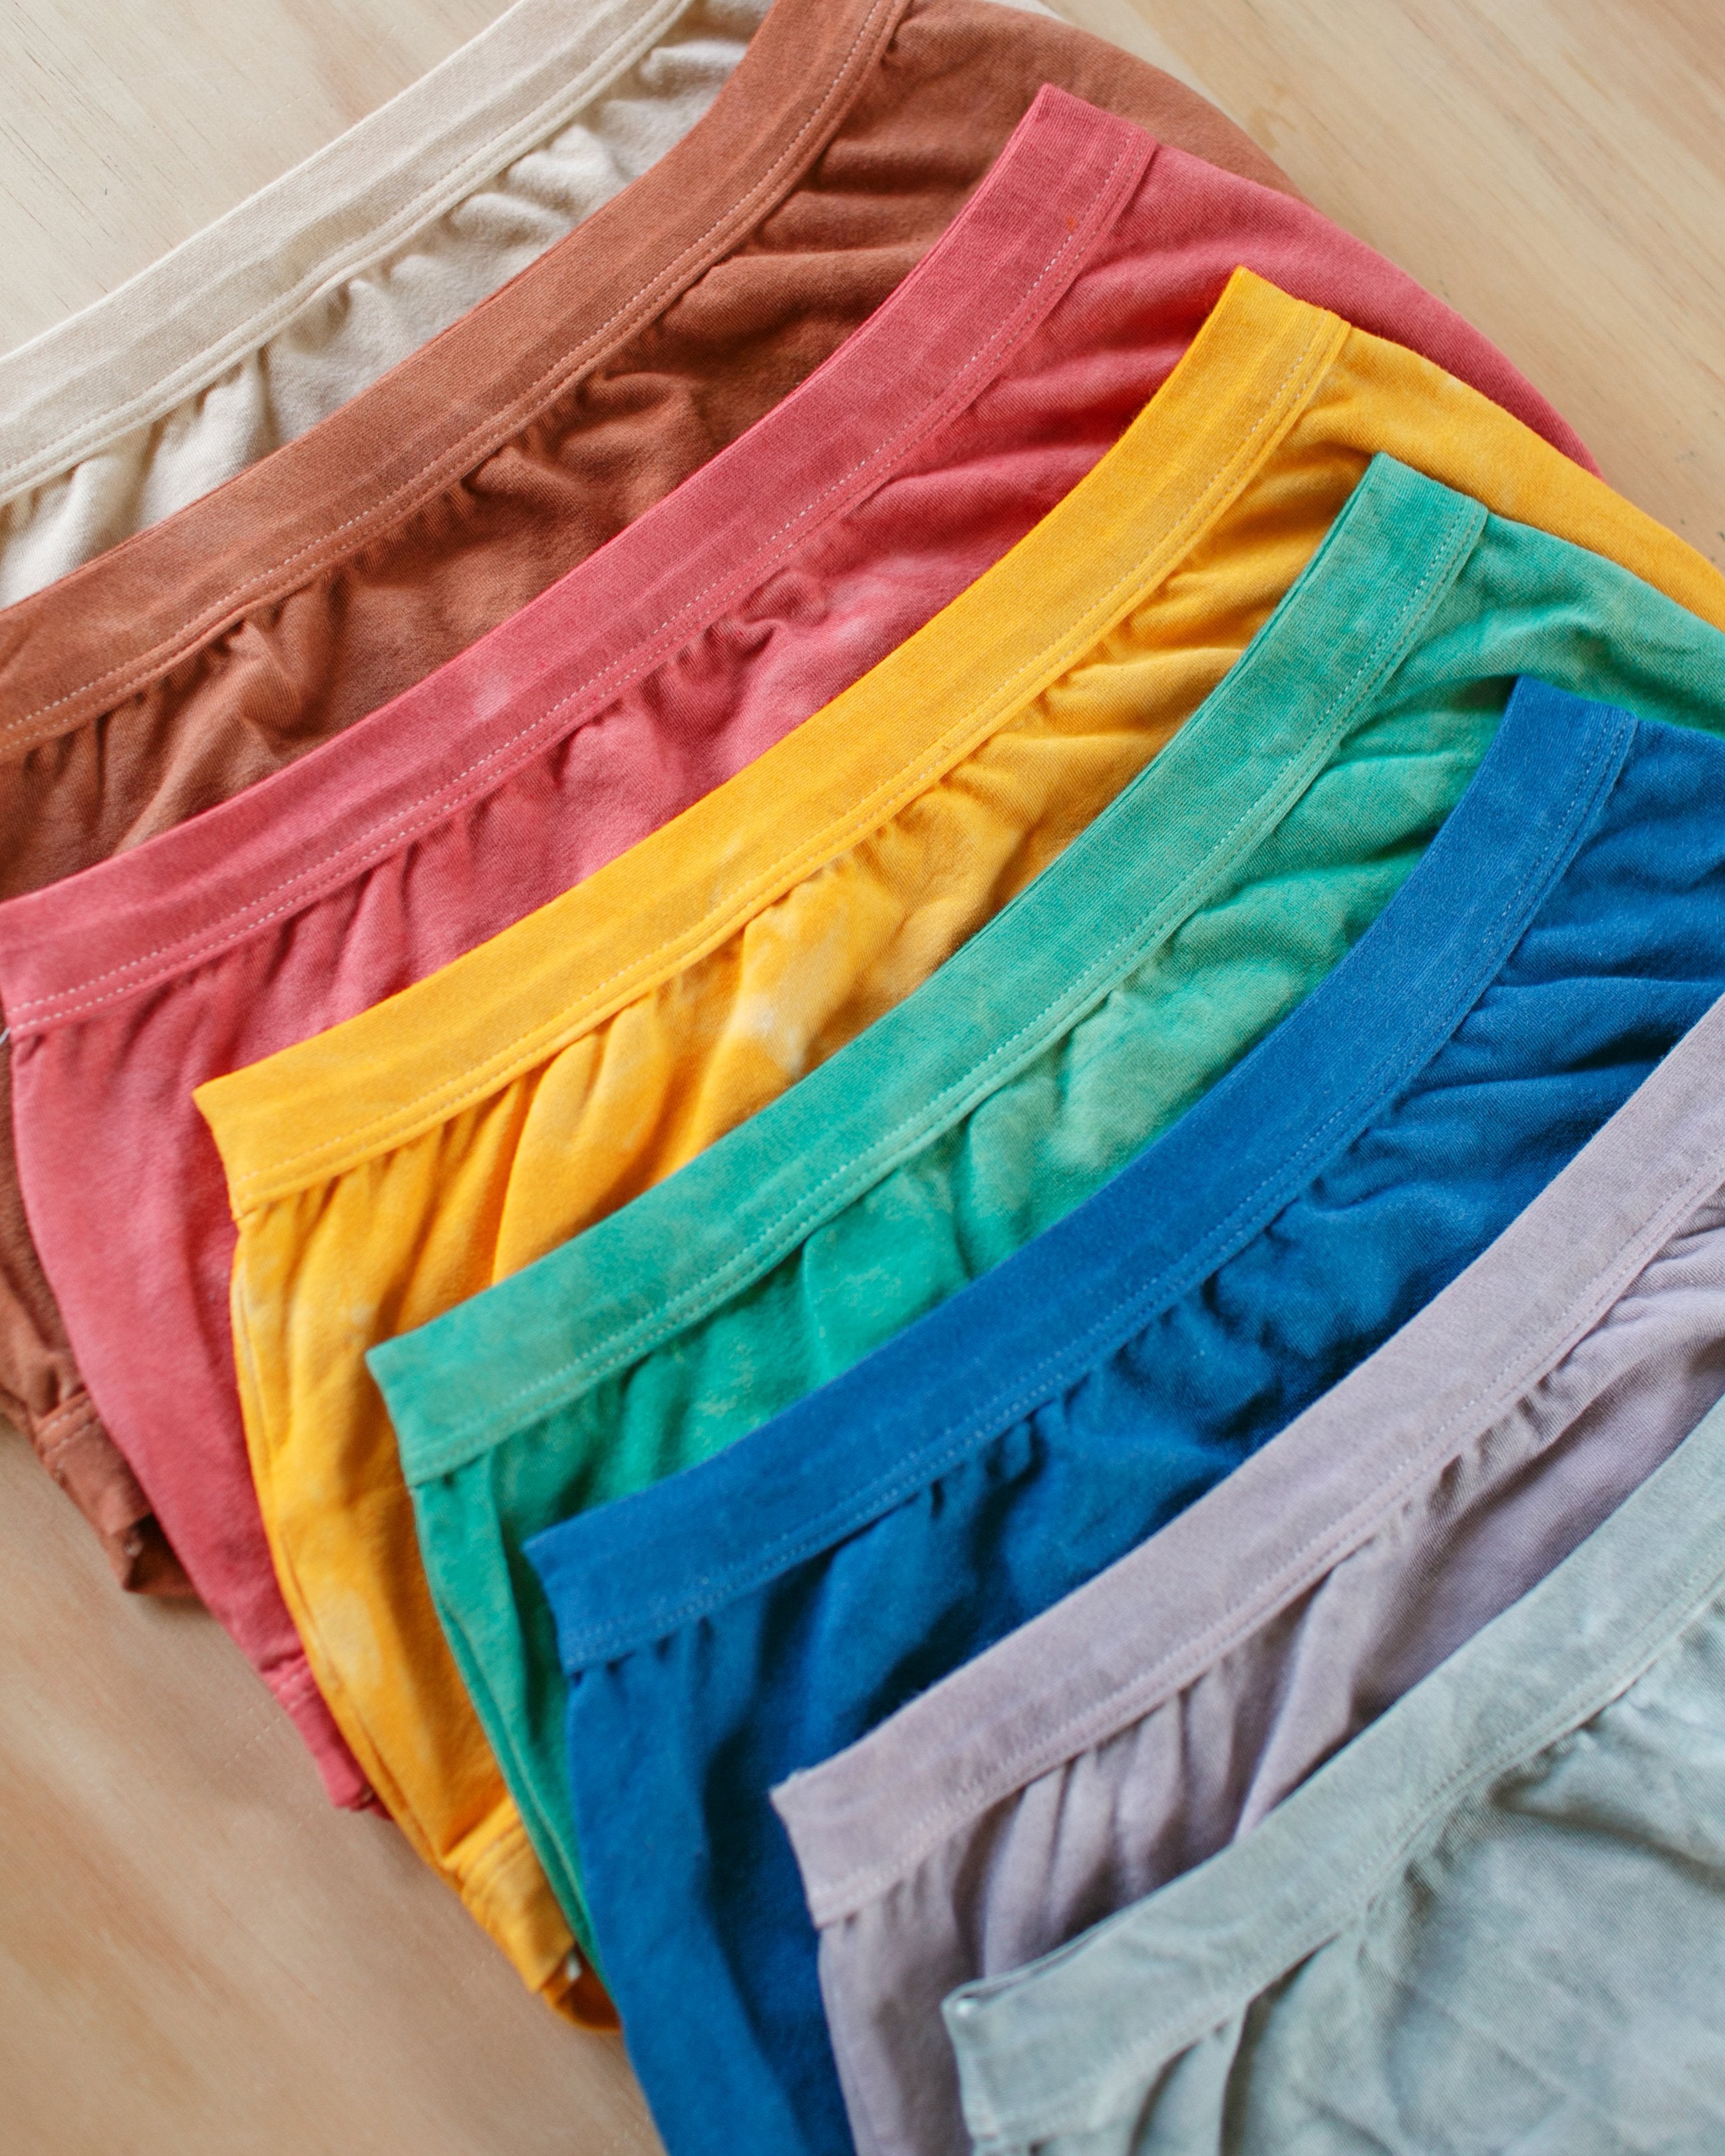 Eight Thunderpants organic cotton underwear in different limited edition hand dyed colors.